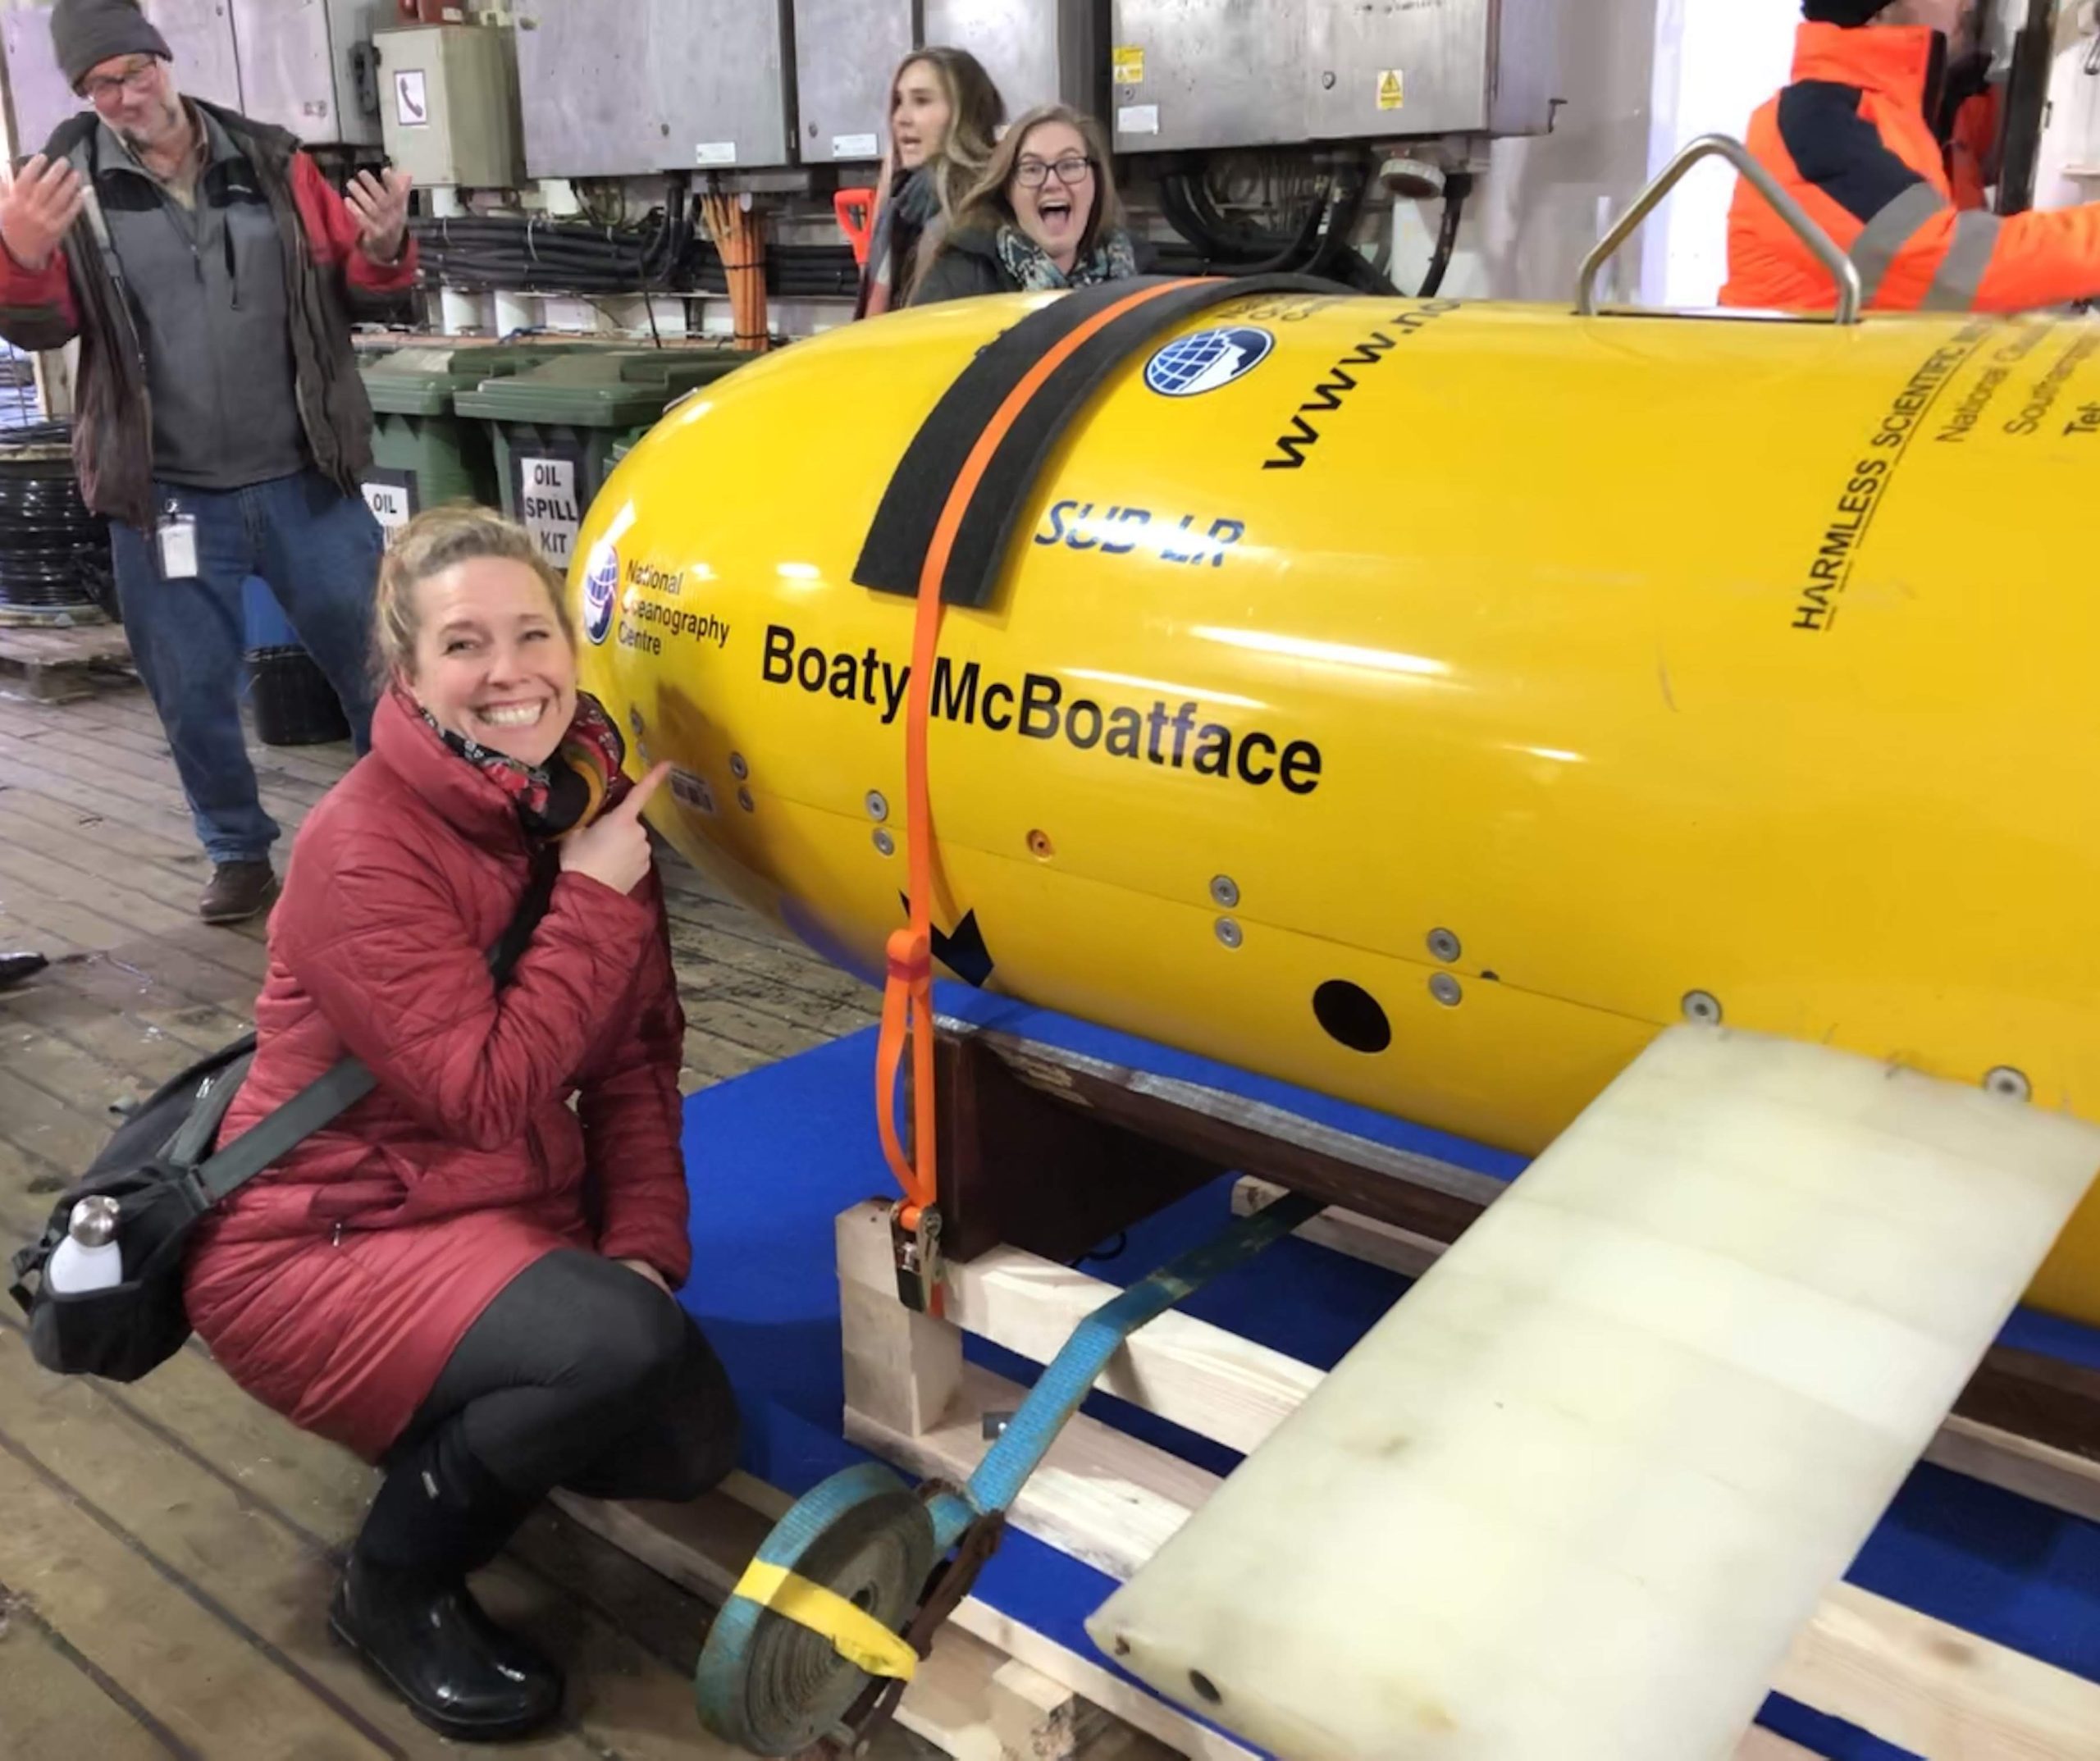 Jessica and a colleague pose next to Boaty McBoatface